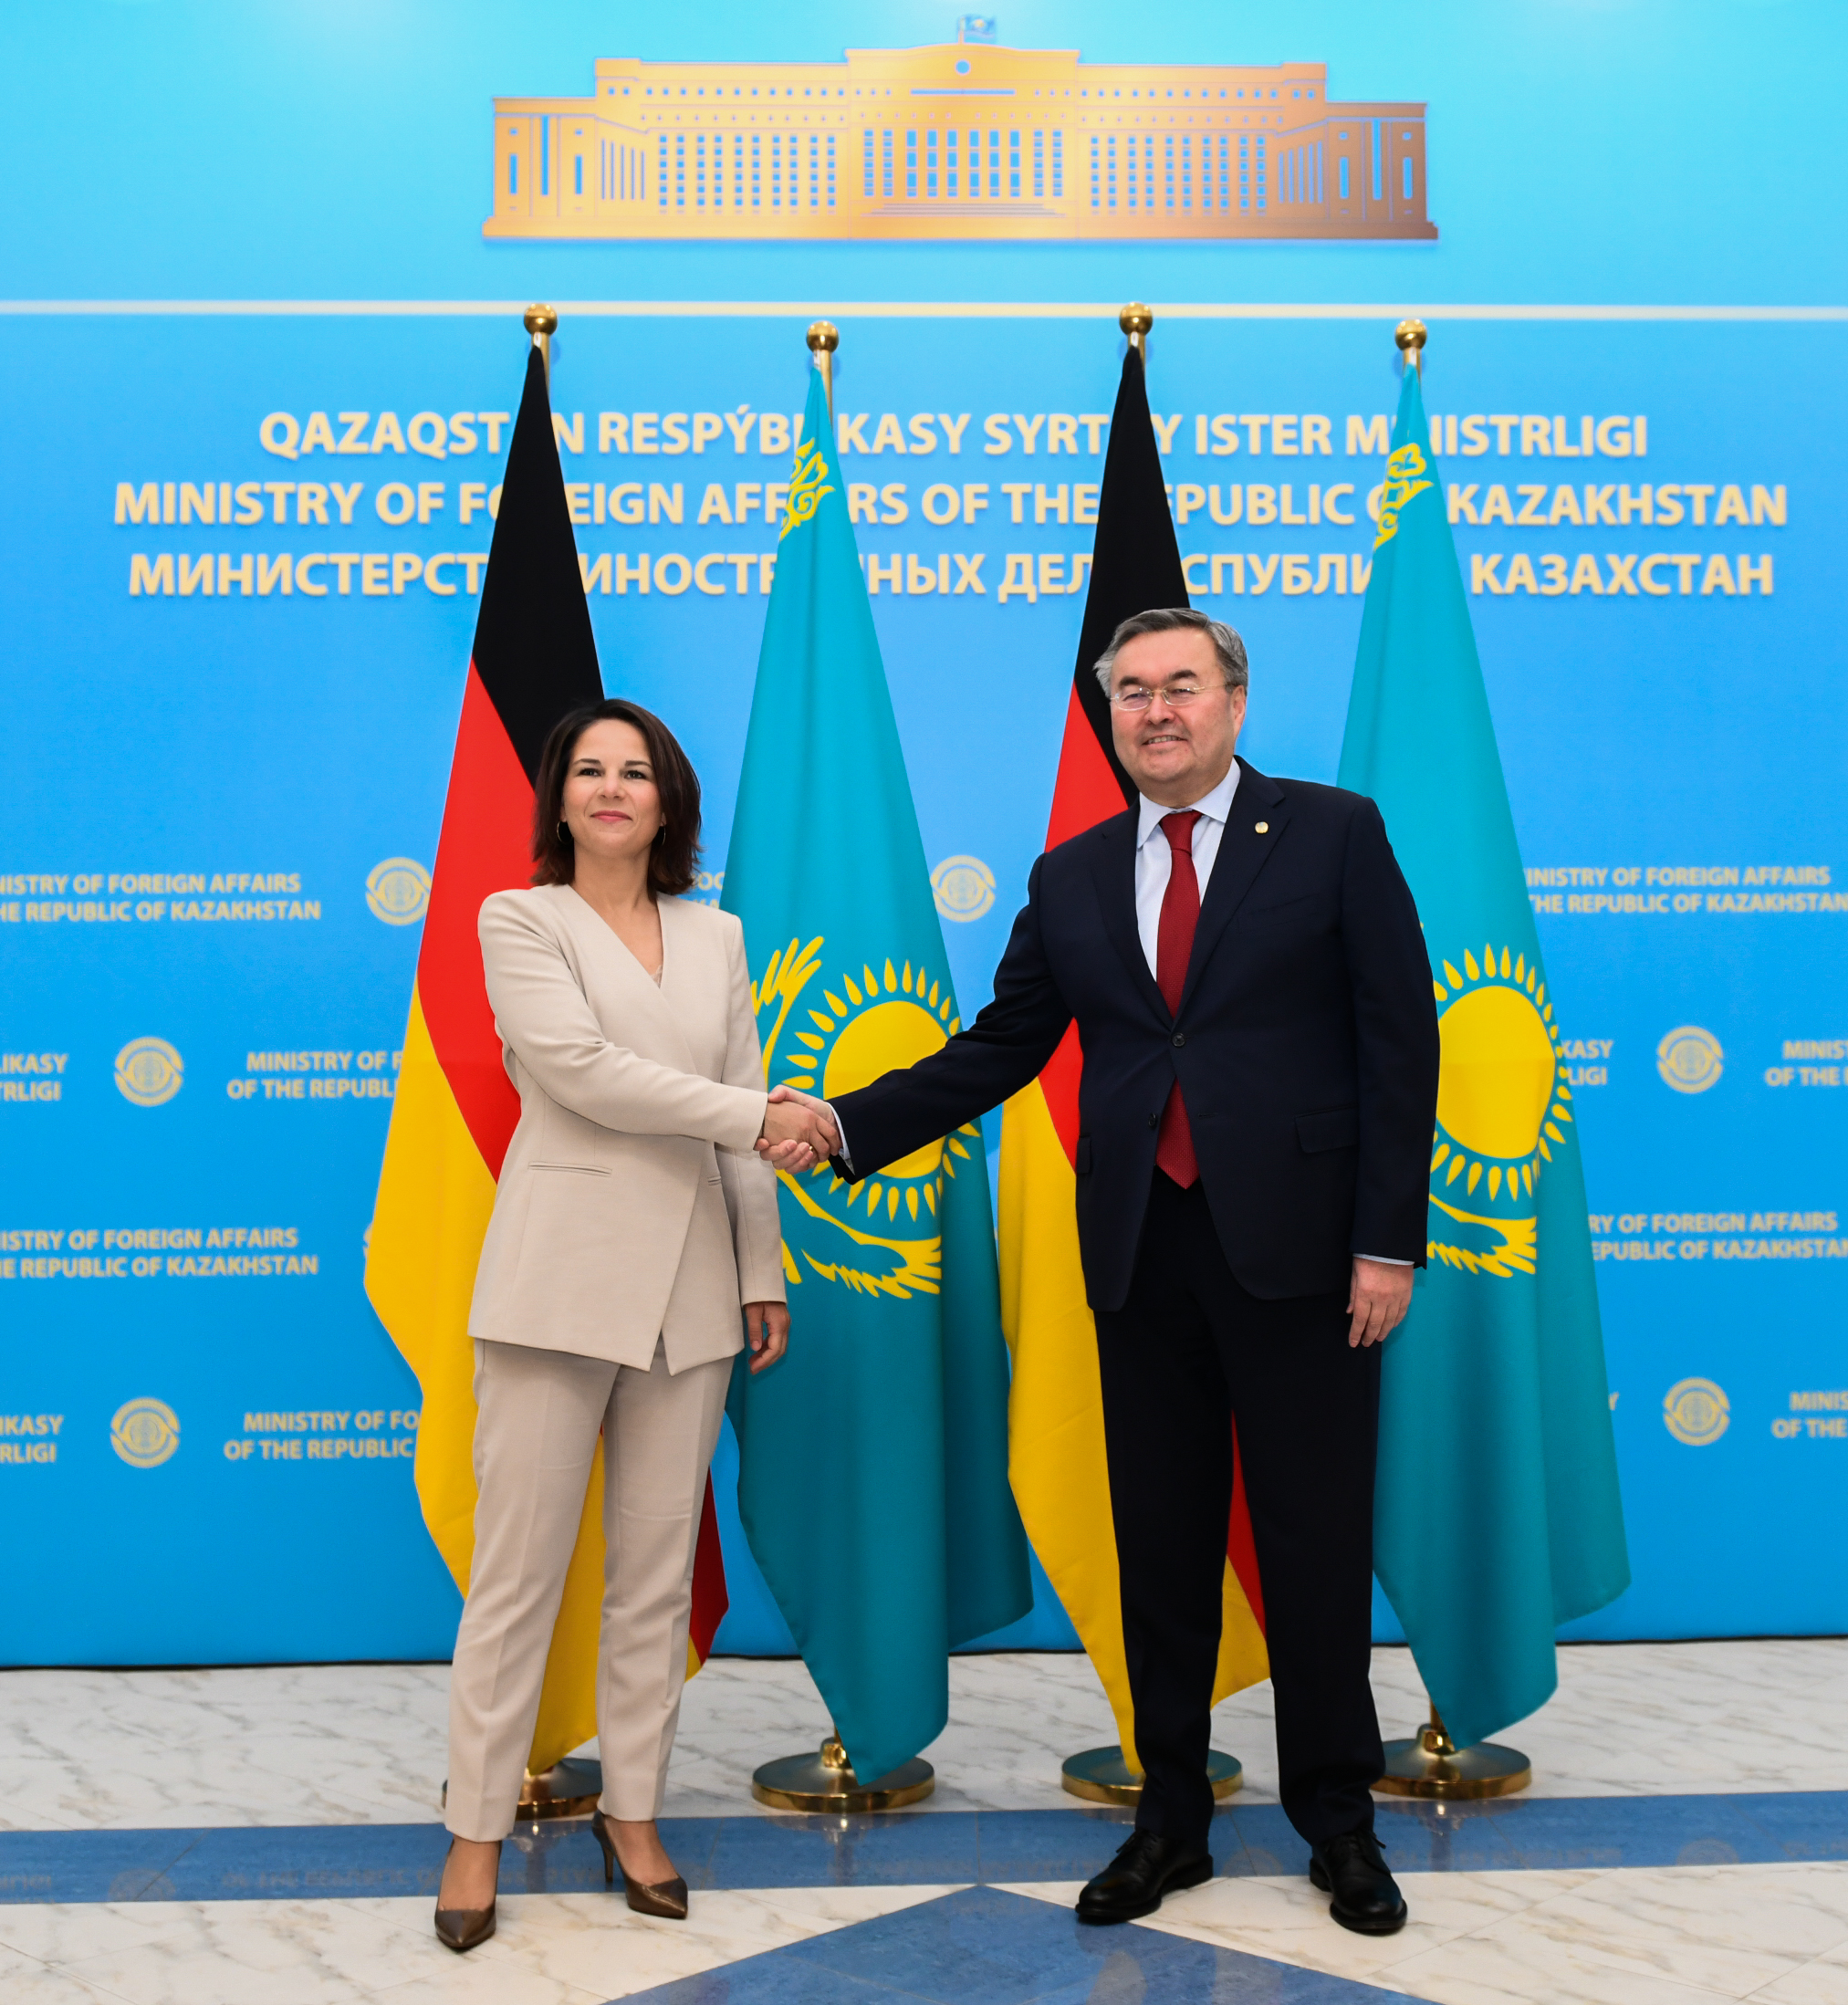 Kazakh and German Foreign Ministers Discuss Prospects for Strengthening Close Political and Economic Partnership